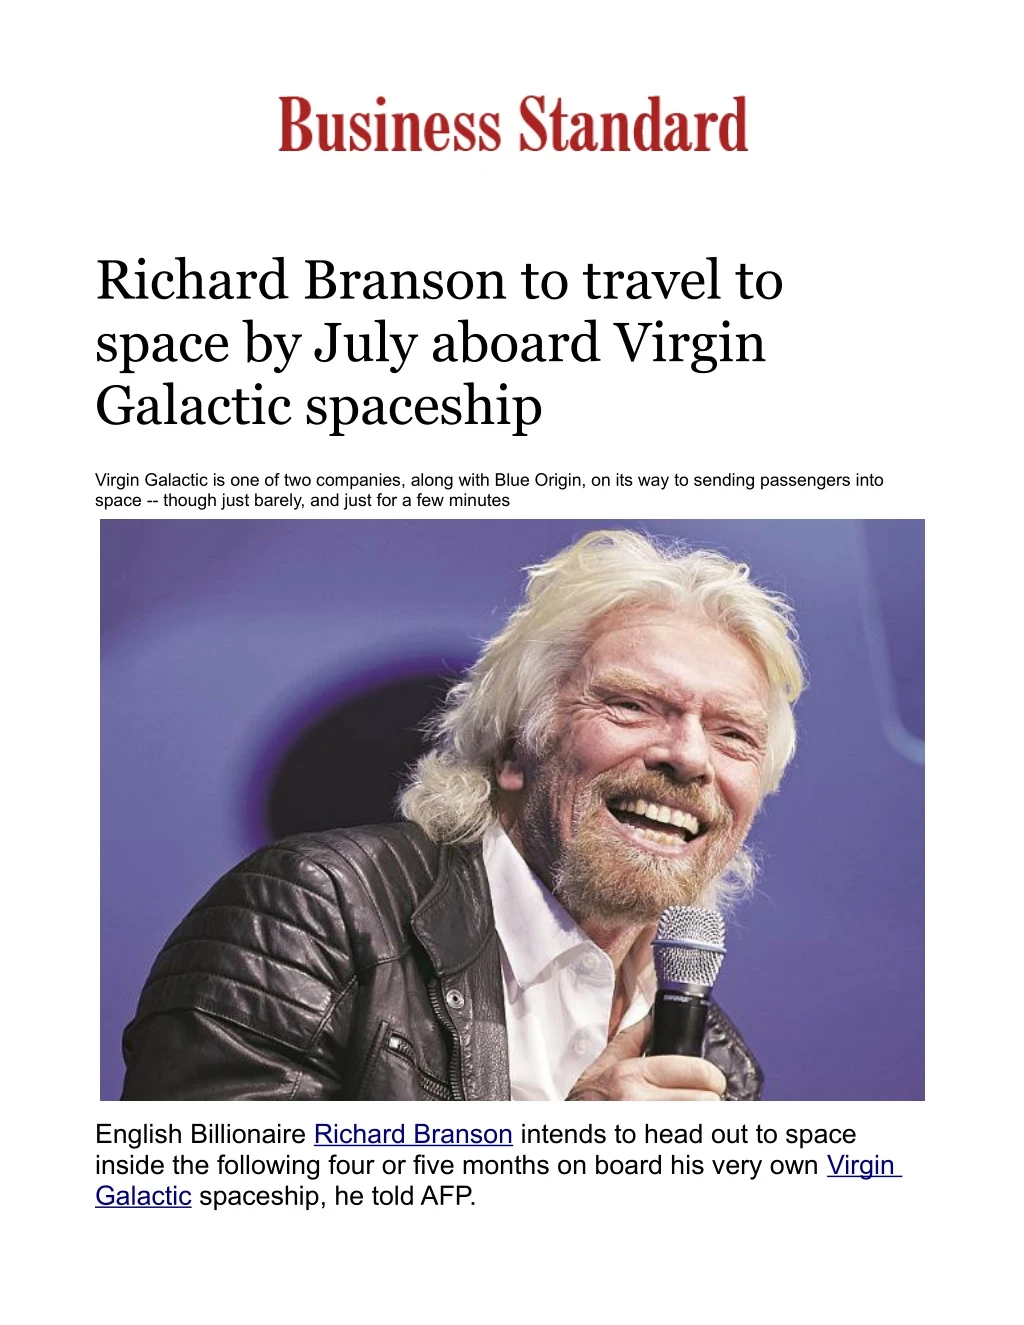 richard branson to travel to space by july aboard